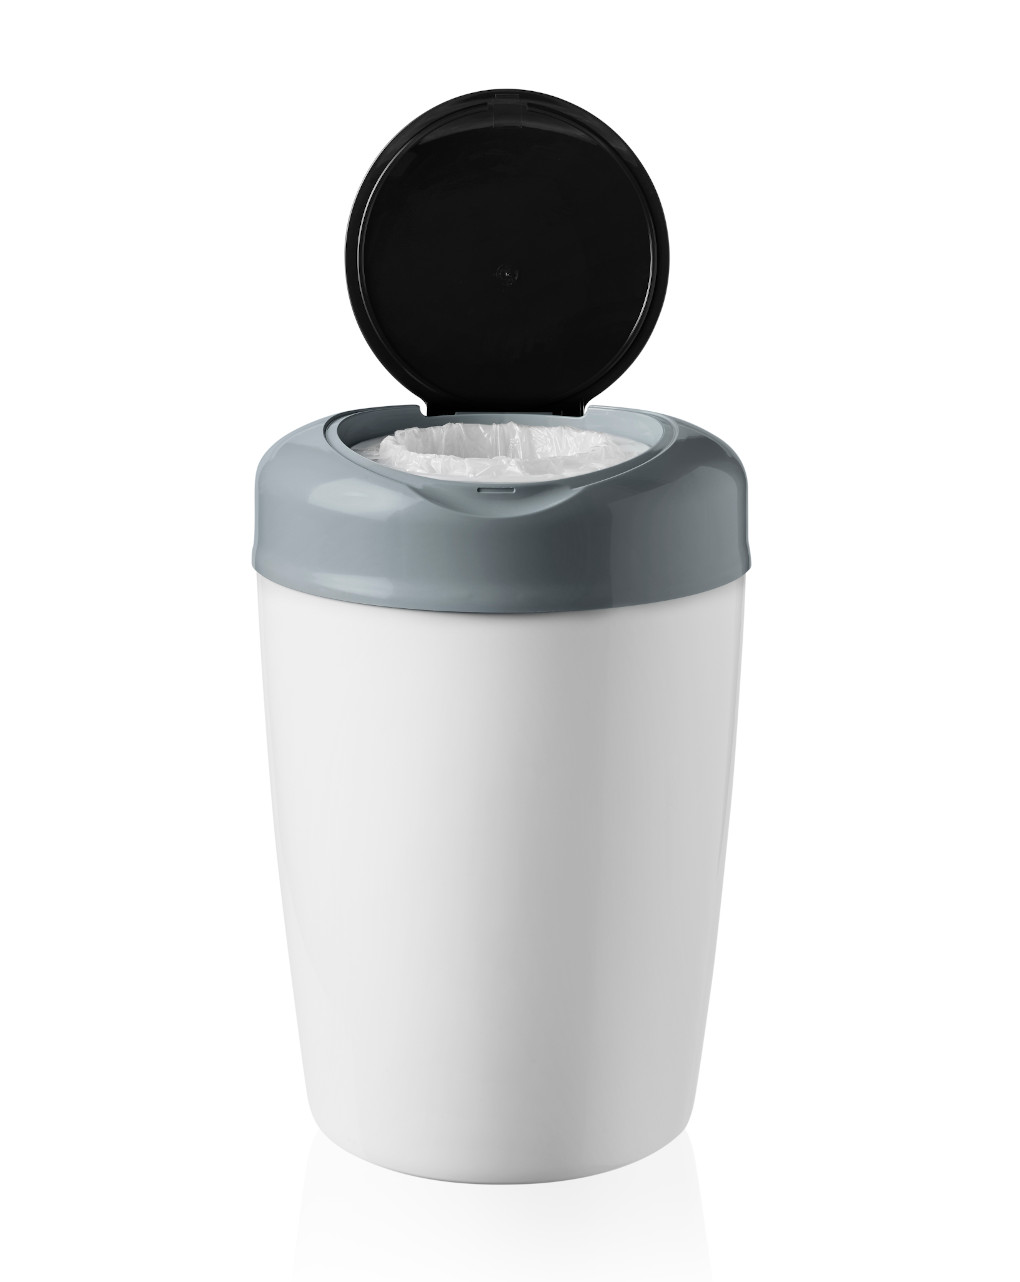 Tommee tippee sangenic simplee sistema di smaltimento pannolini, bianco - Tommee Tippee